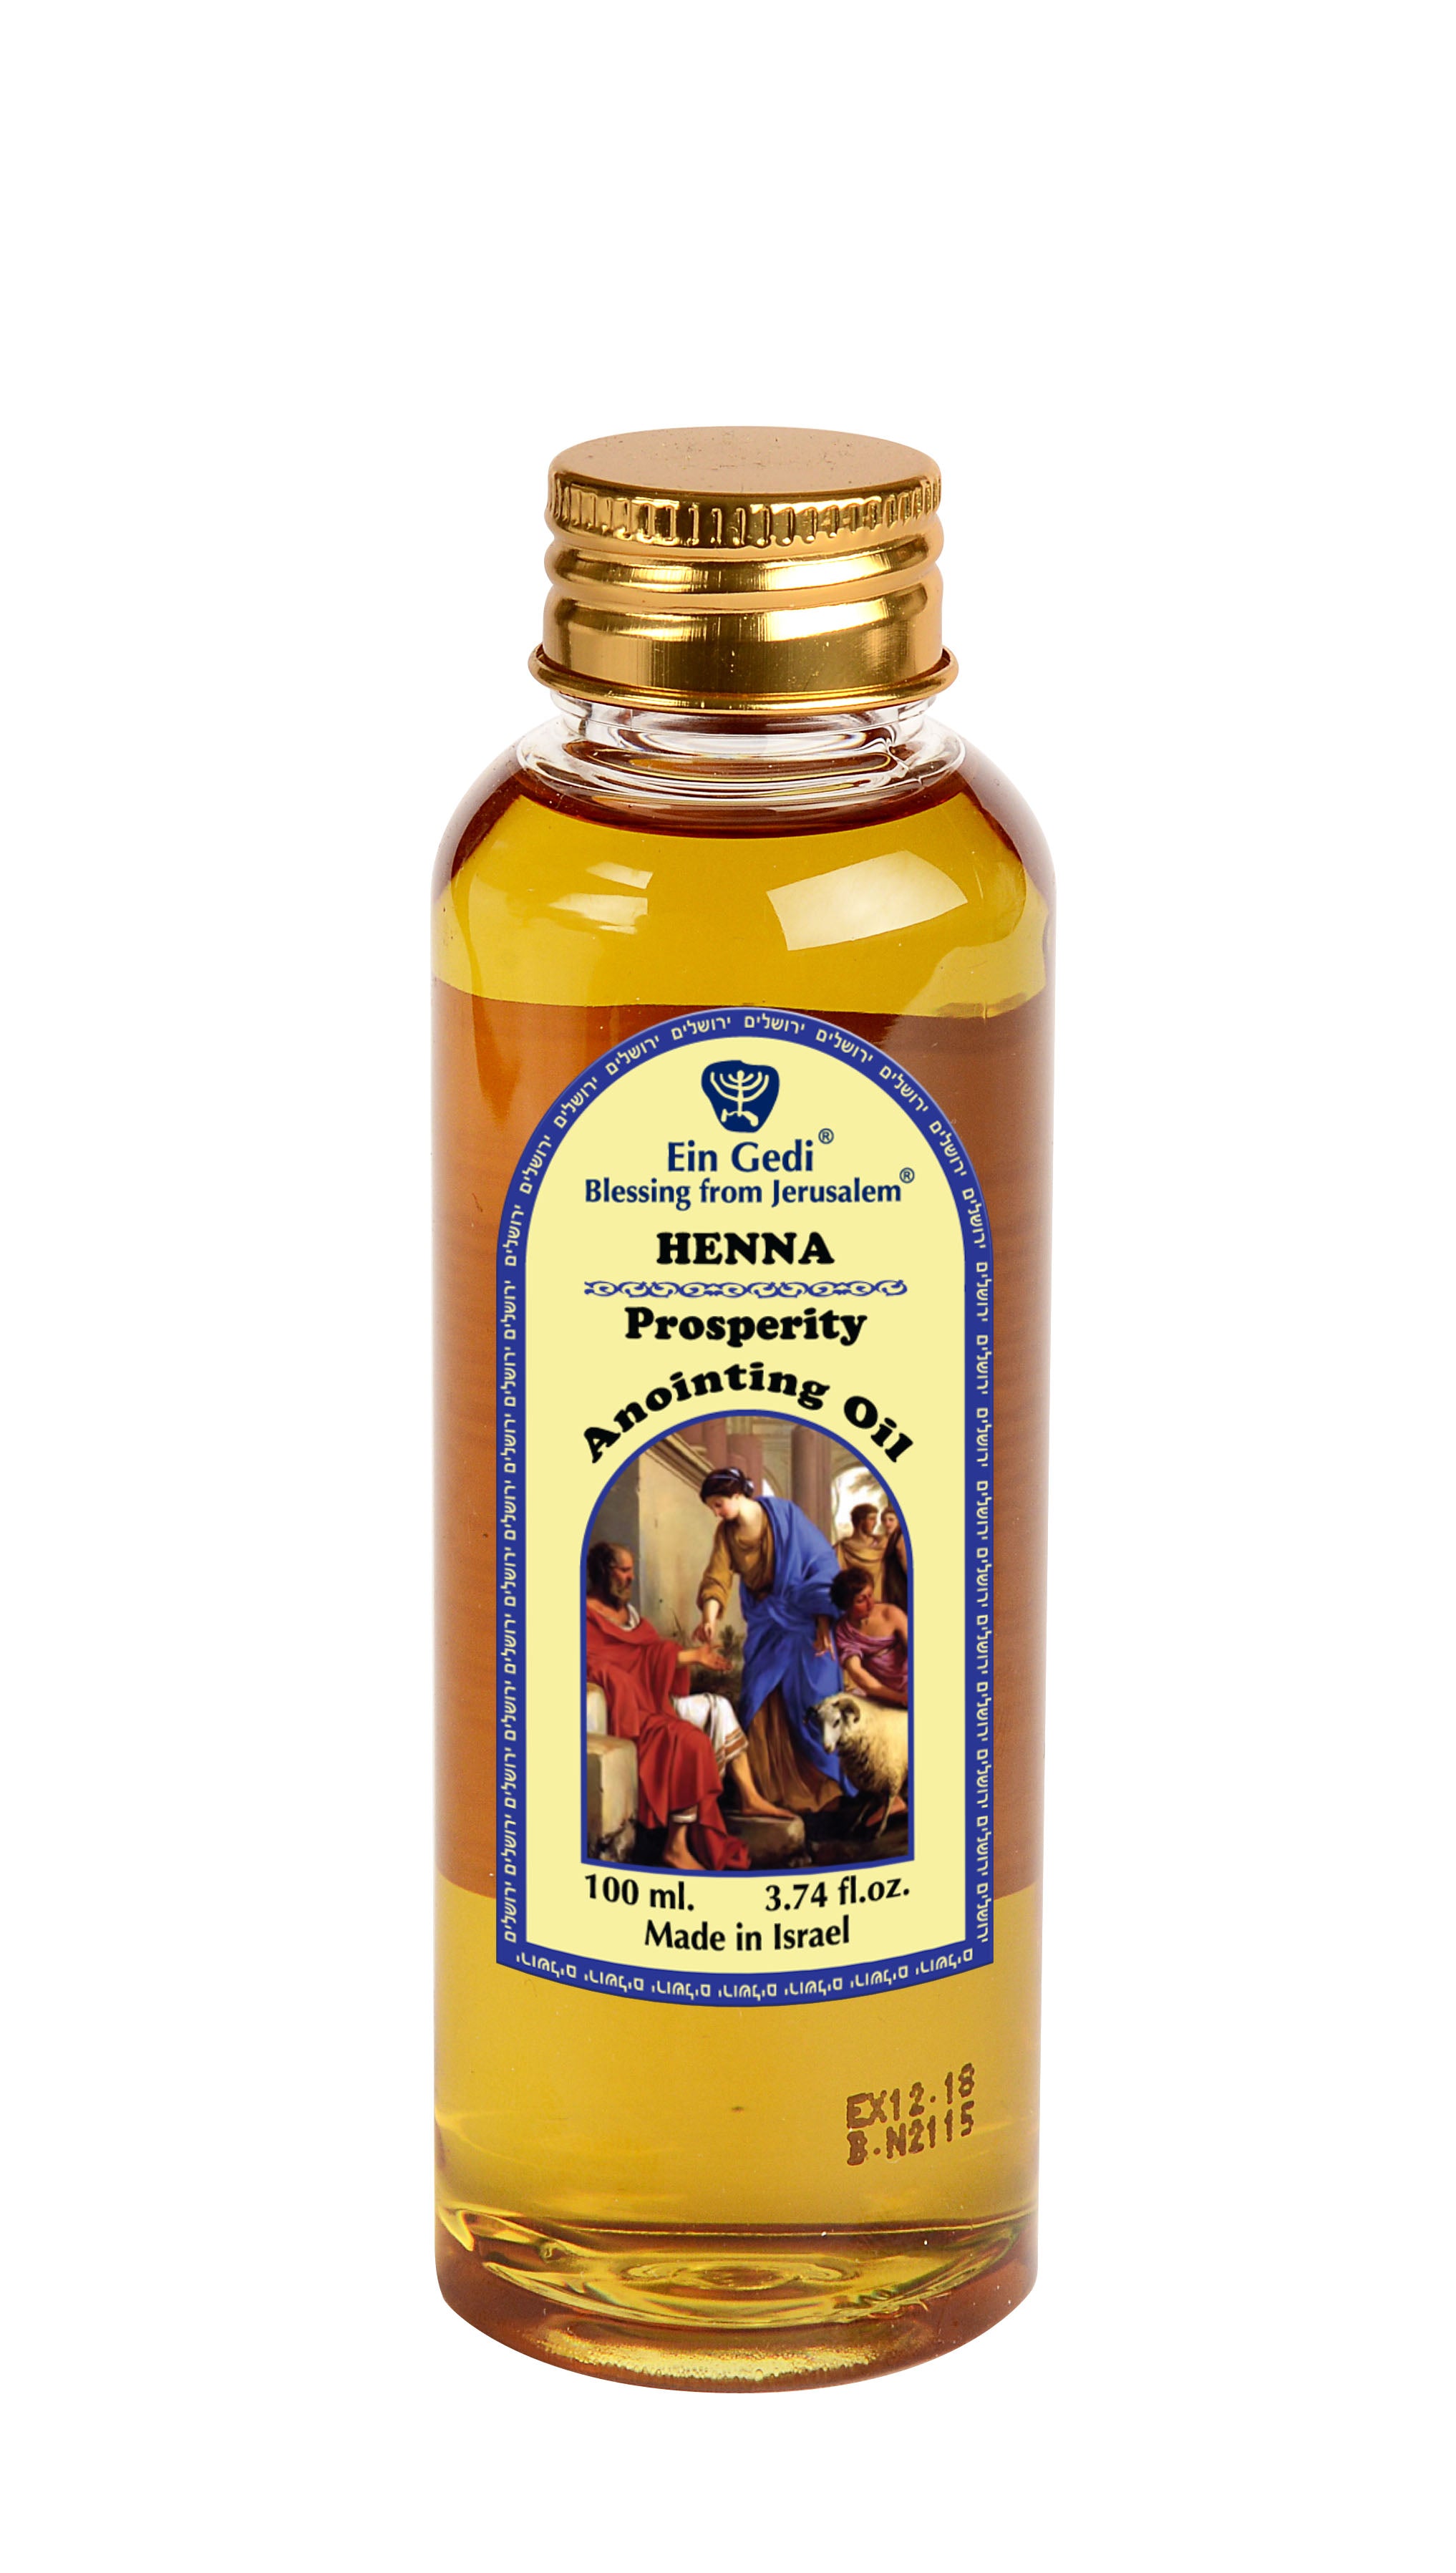 Anoint Yourself!™ Hand-made Anointing Oil for Consecration by